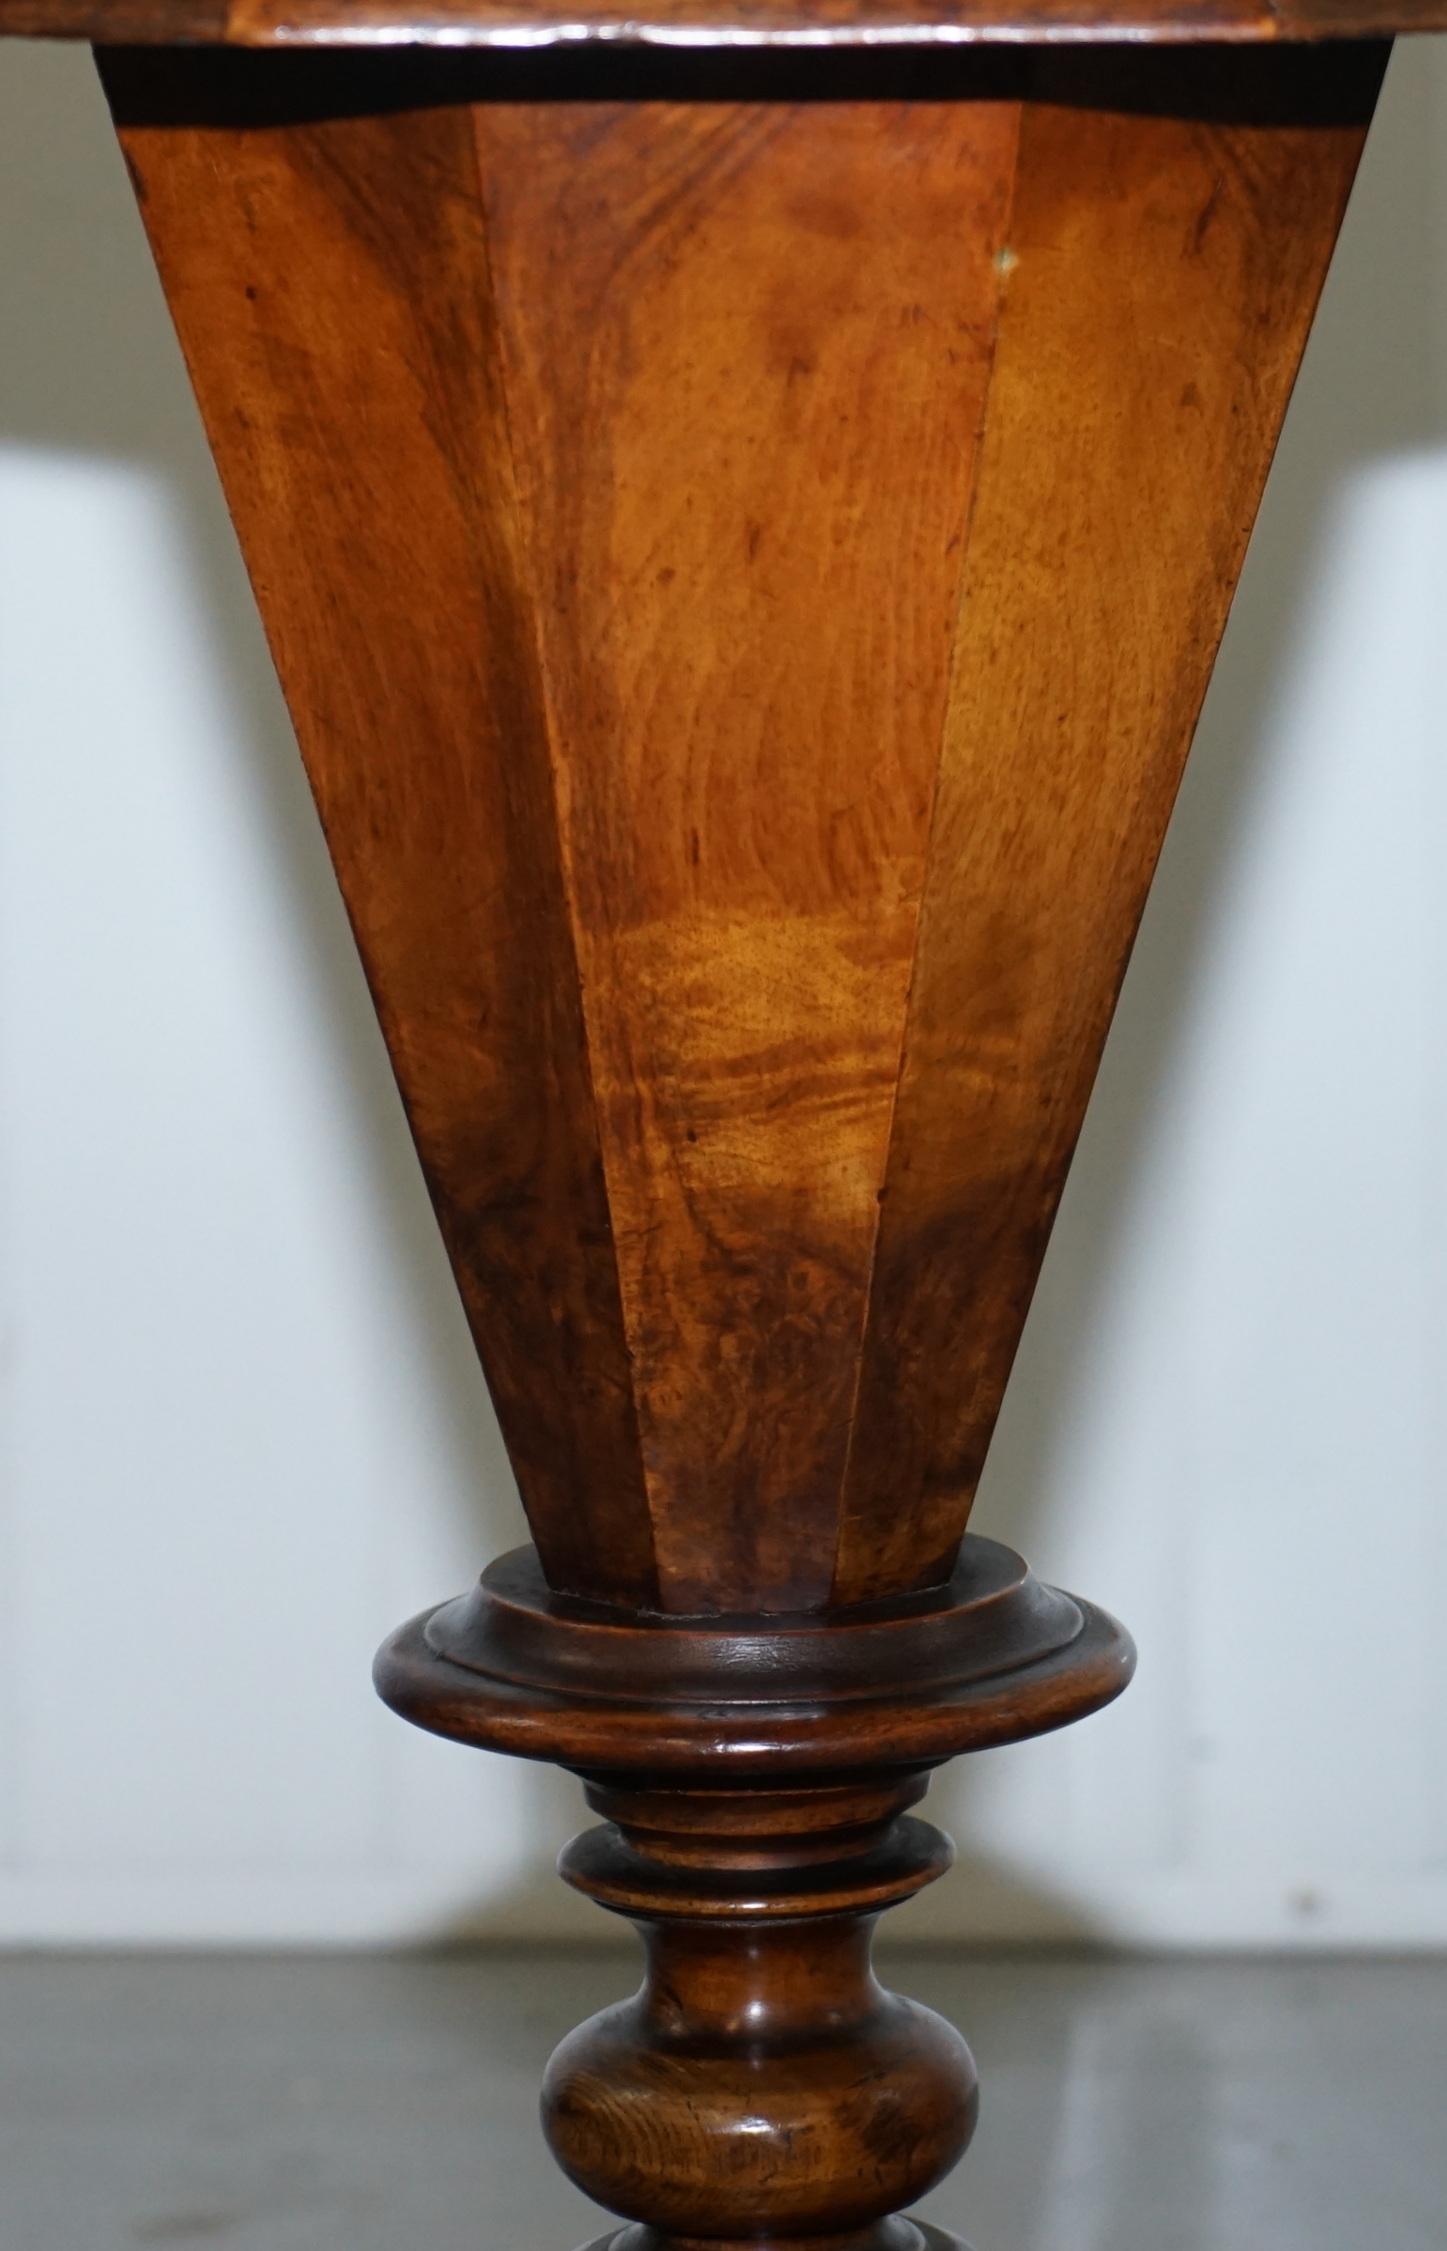 Burl Stunning Burr Walnut Victorian Sewing or Work Box Great as Side Lamp End Table